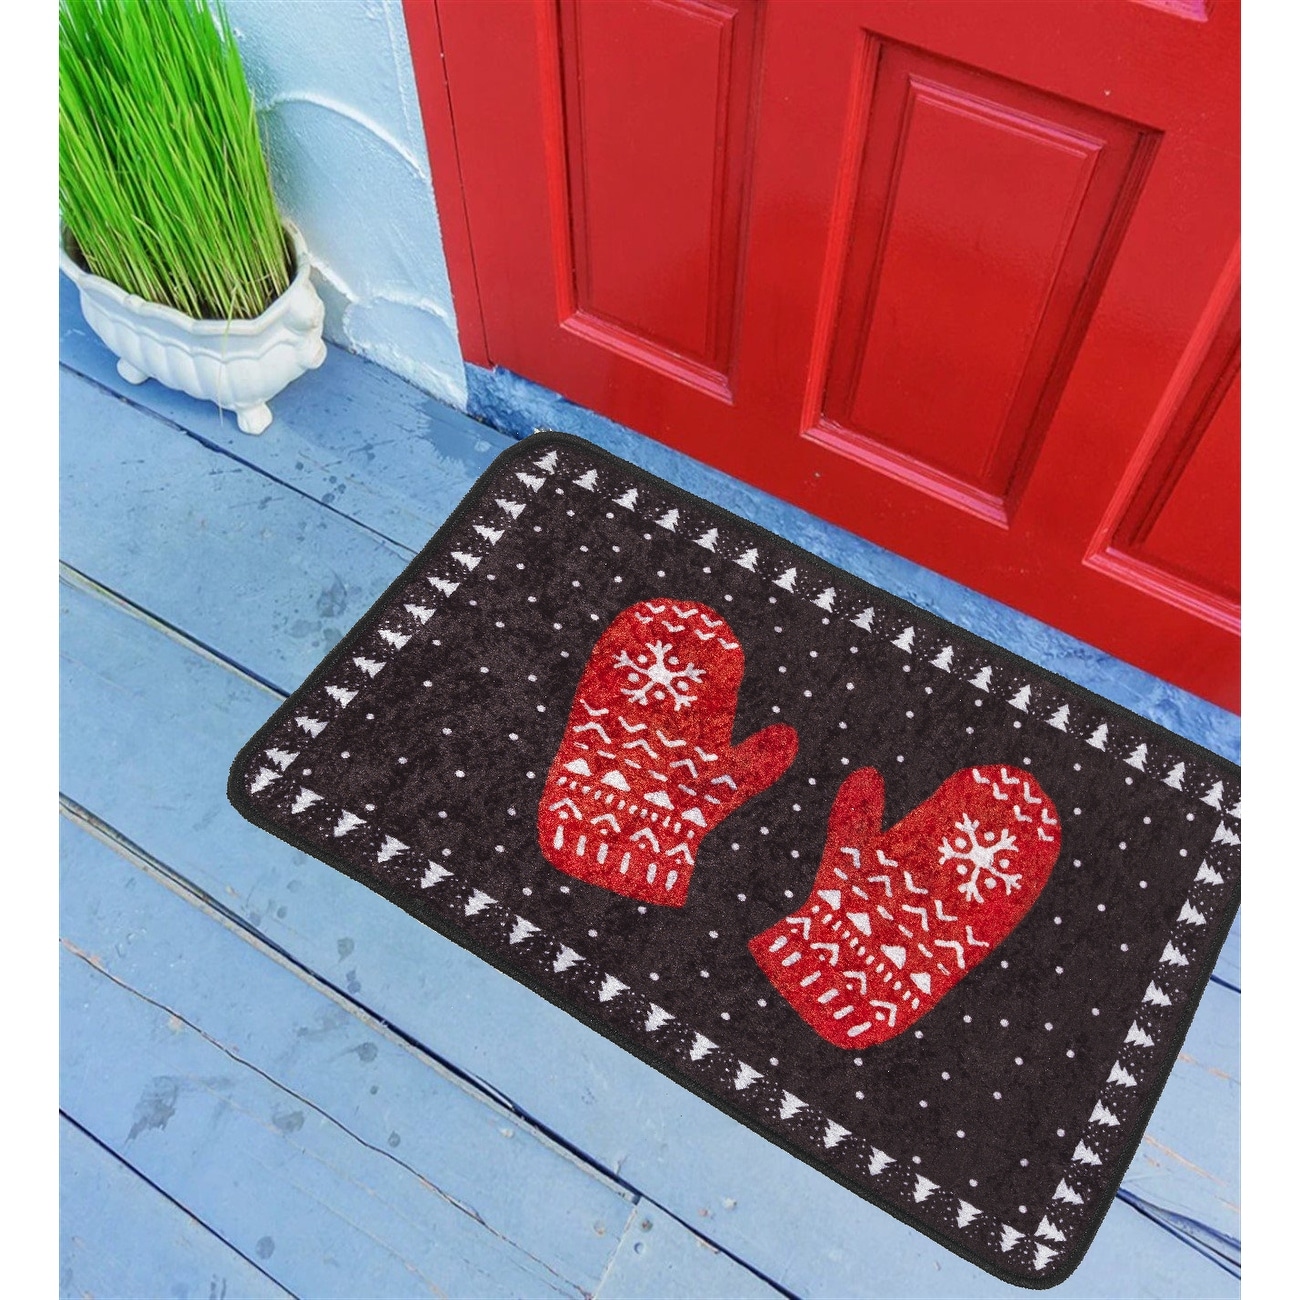 https://ak1.ostkcdn.com/images/products/is/images/direct/9e8b495ba04a370e1181936272e812efd5a0505b/Winter-Floor-Mat%2C-30x20.jpg